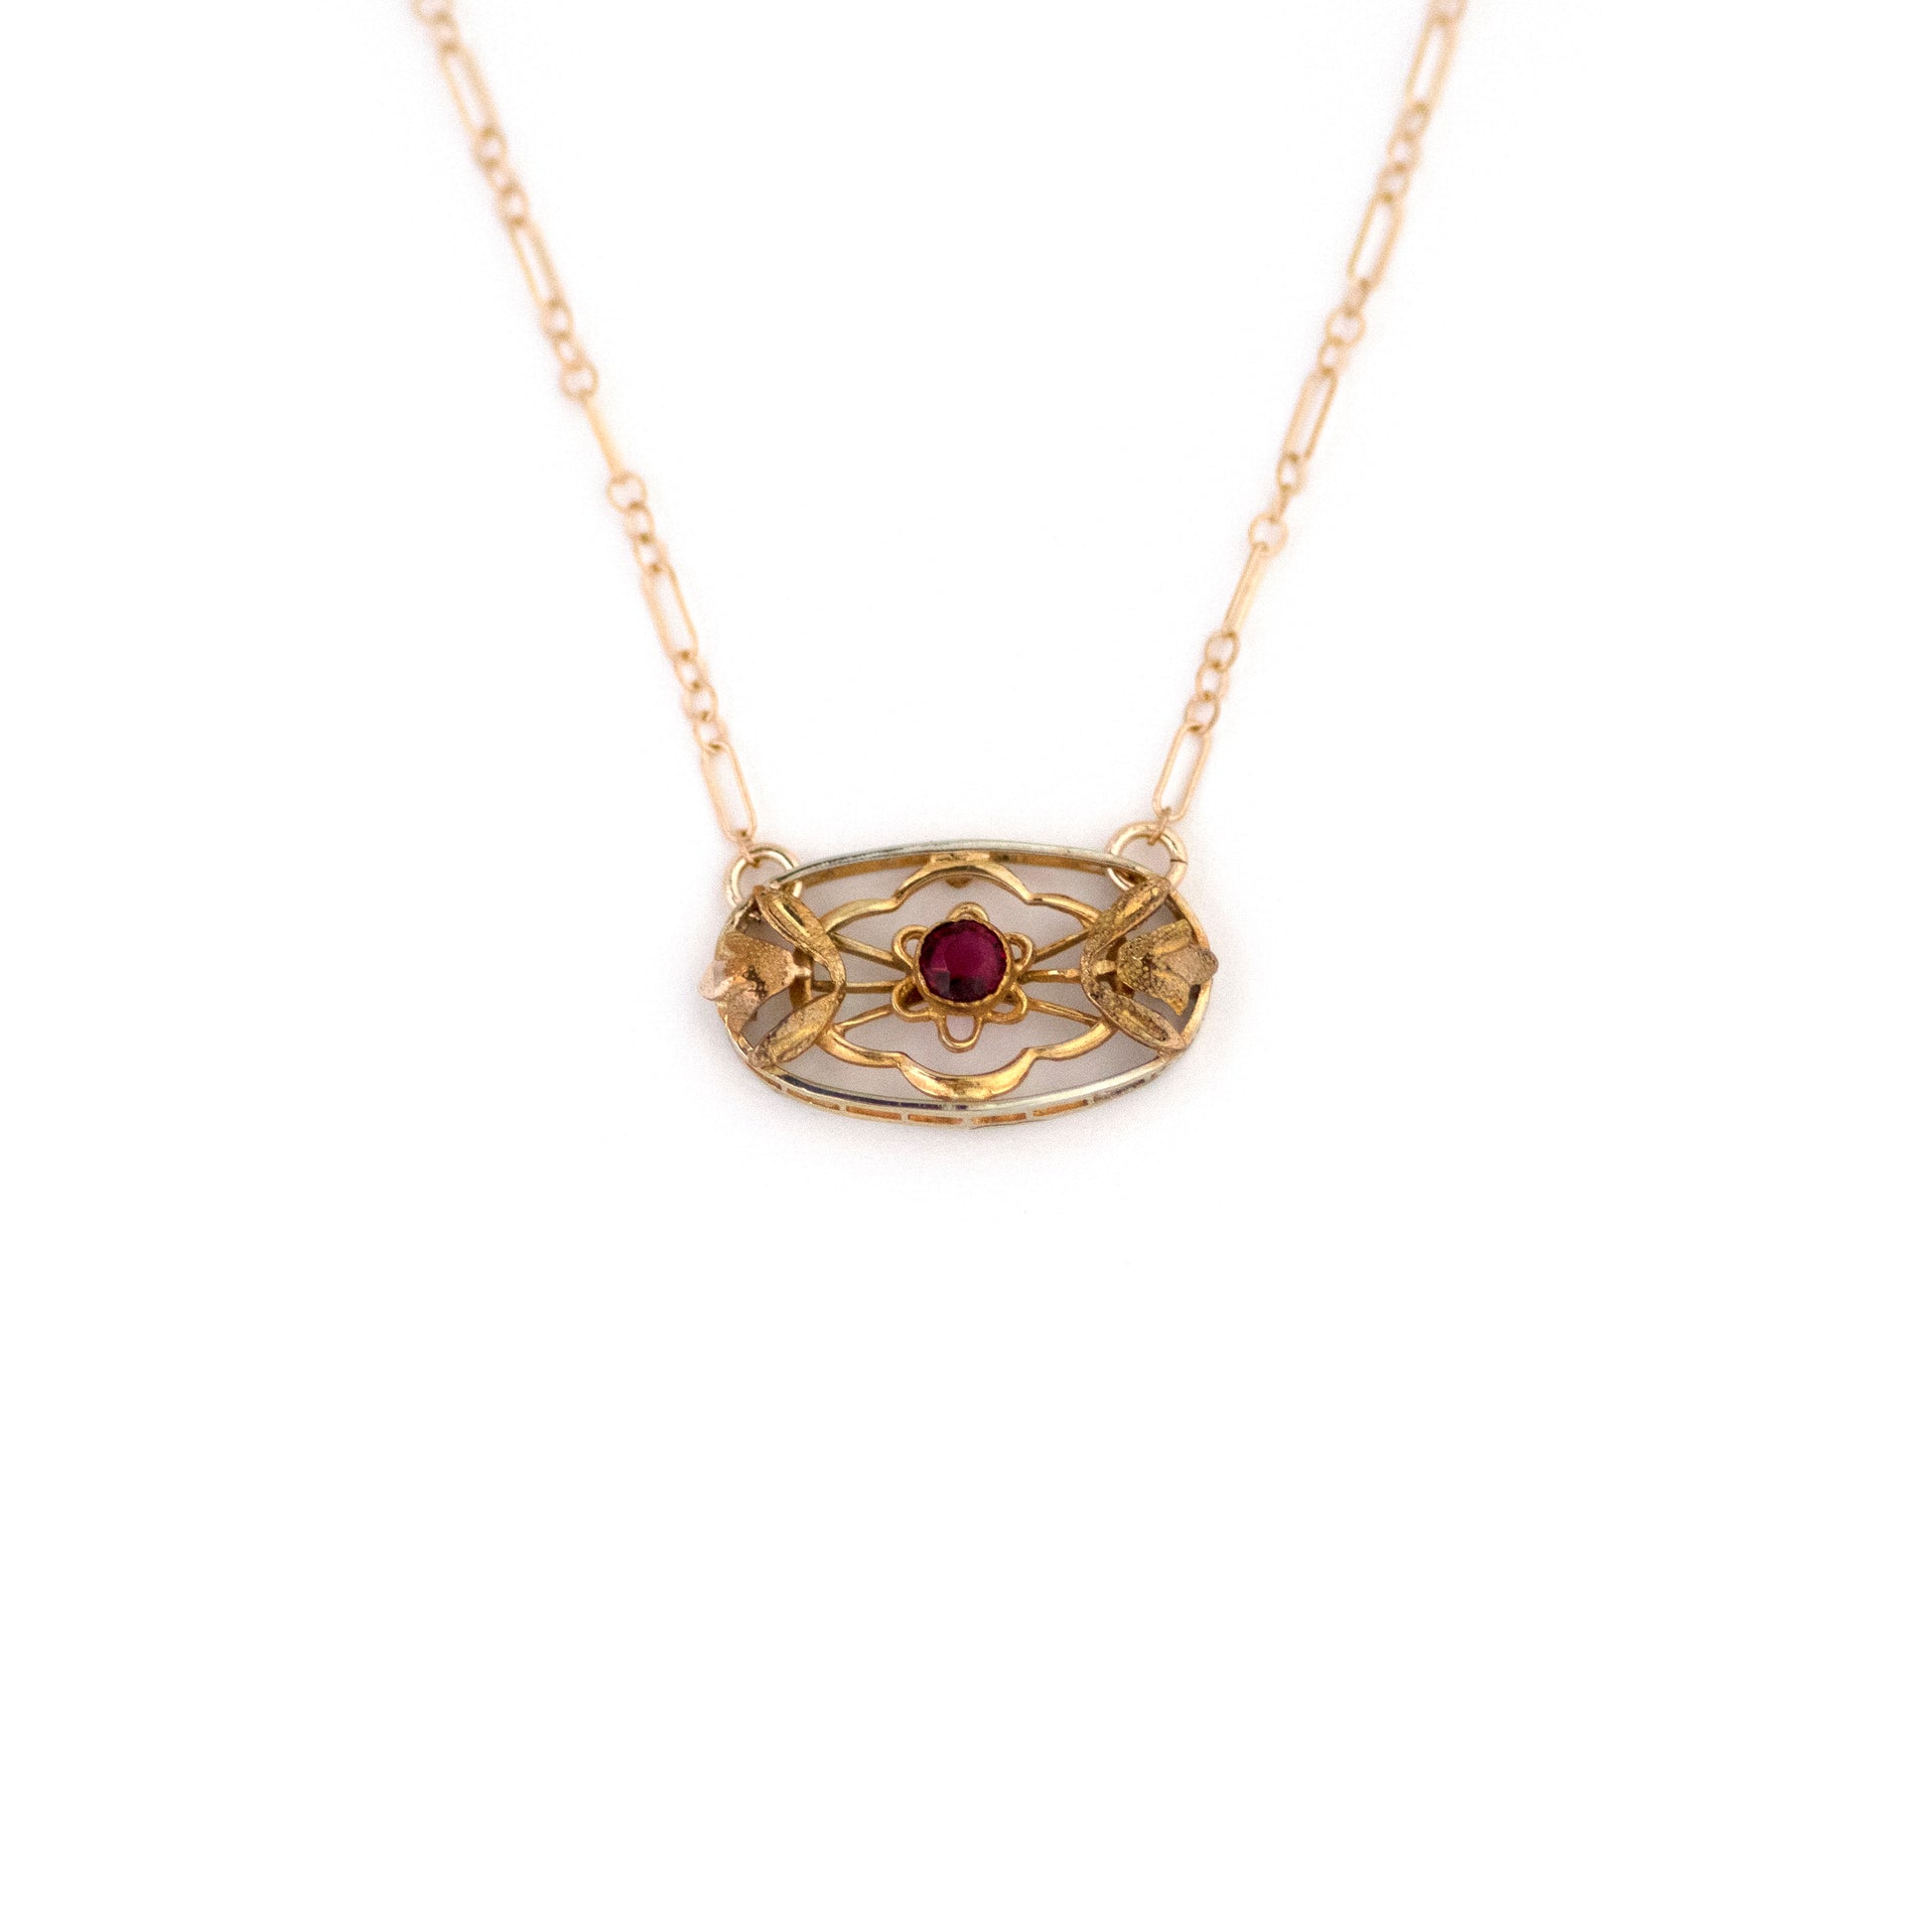 This one-of-a-kind conversion necklace is made up of:  Gold filled Victorian brooch pendant from the late 1800s with hand tooled floral tulip details and a ruby red paste stone in its center. 